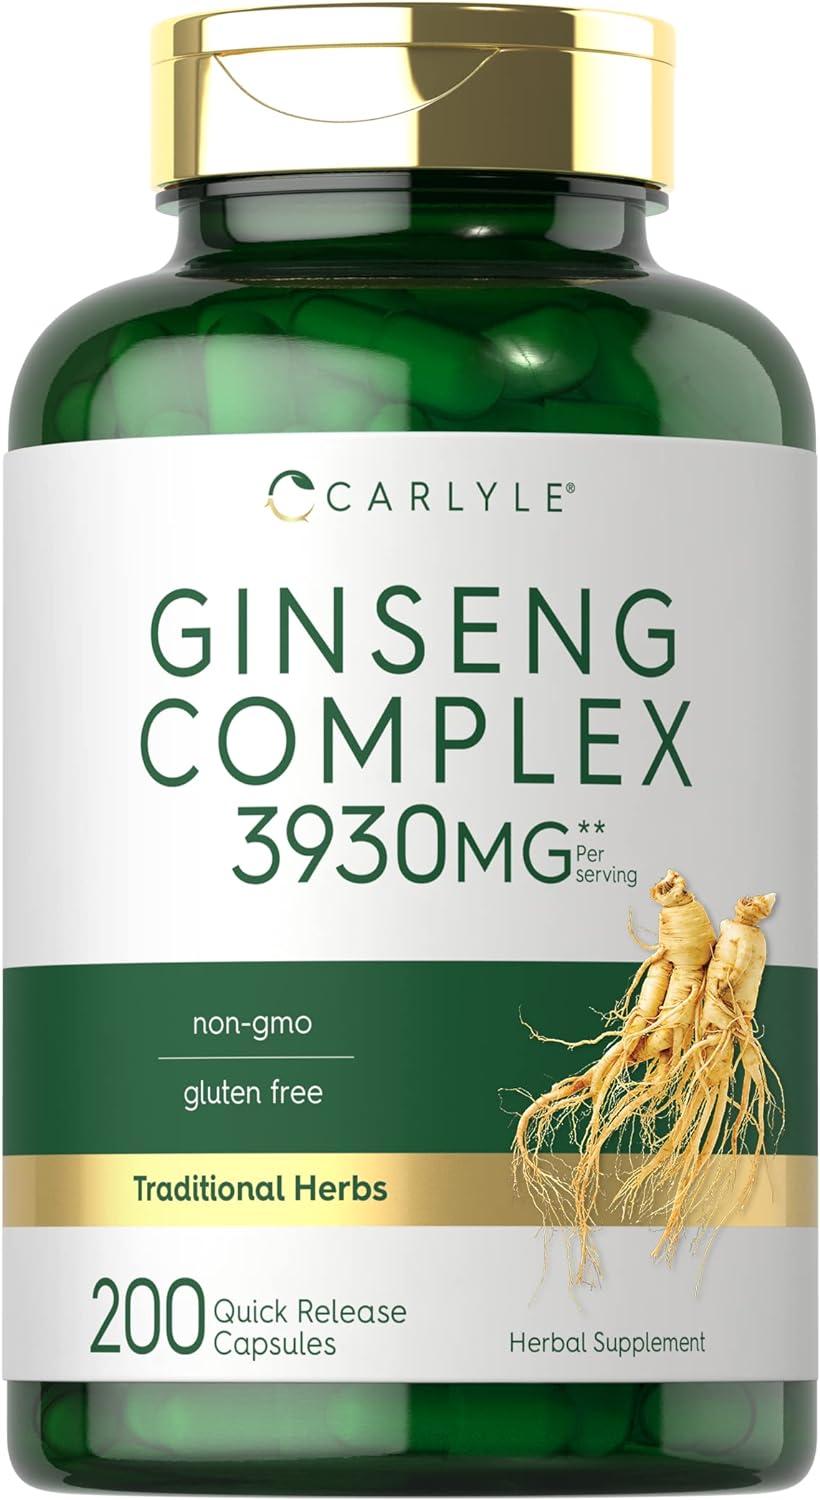 Carlyle Ginseng Complex Capsules | 200 Count | Non-GMO and Gluten Free Extract | Traditional Herbal Root Supplement